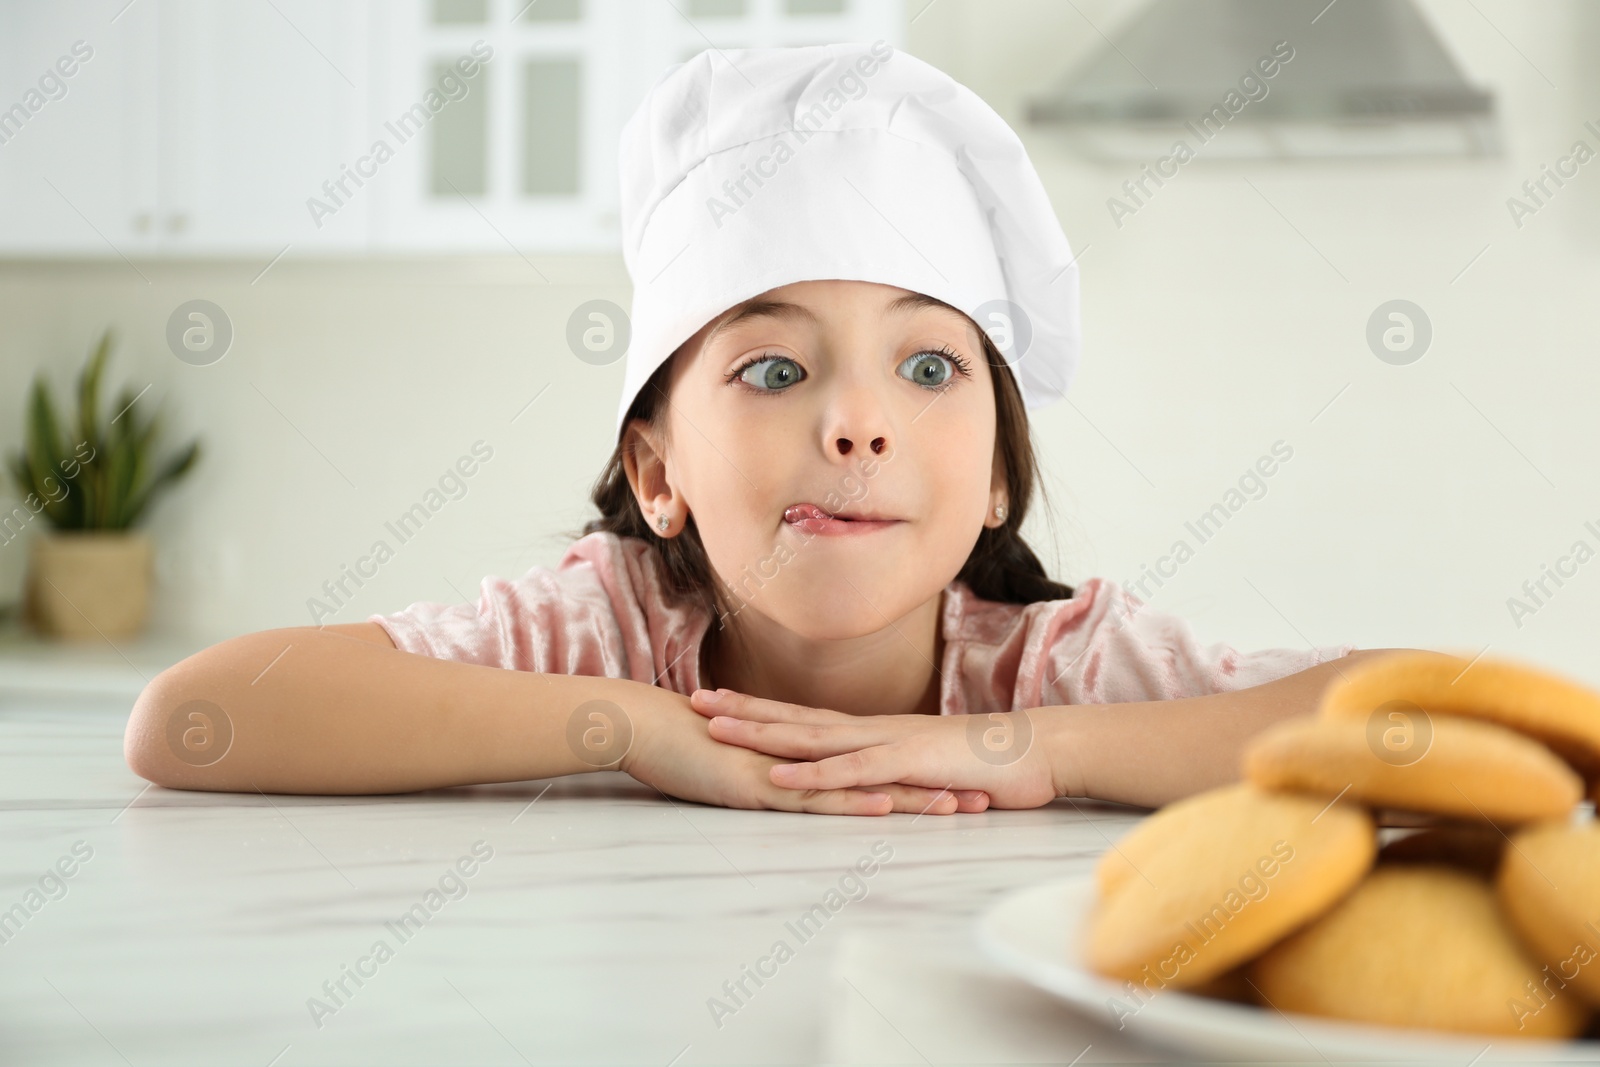 Photo of Cute little girl wearing chef hat at table in kitchen